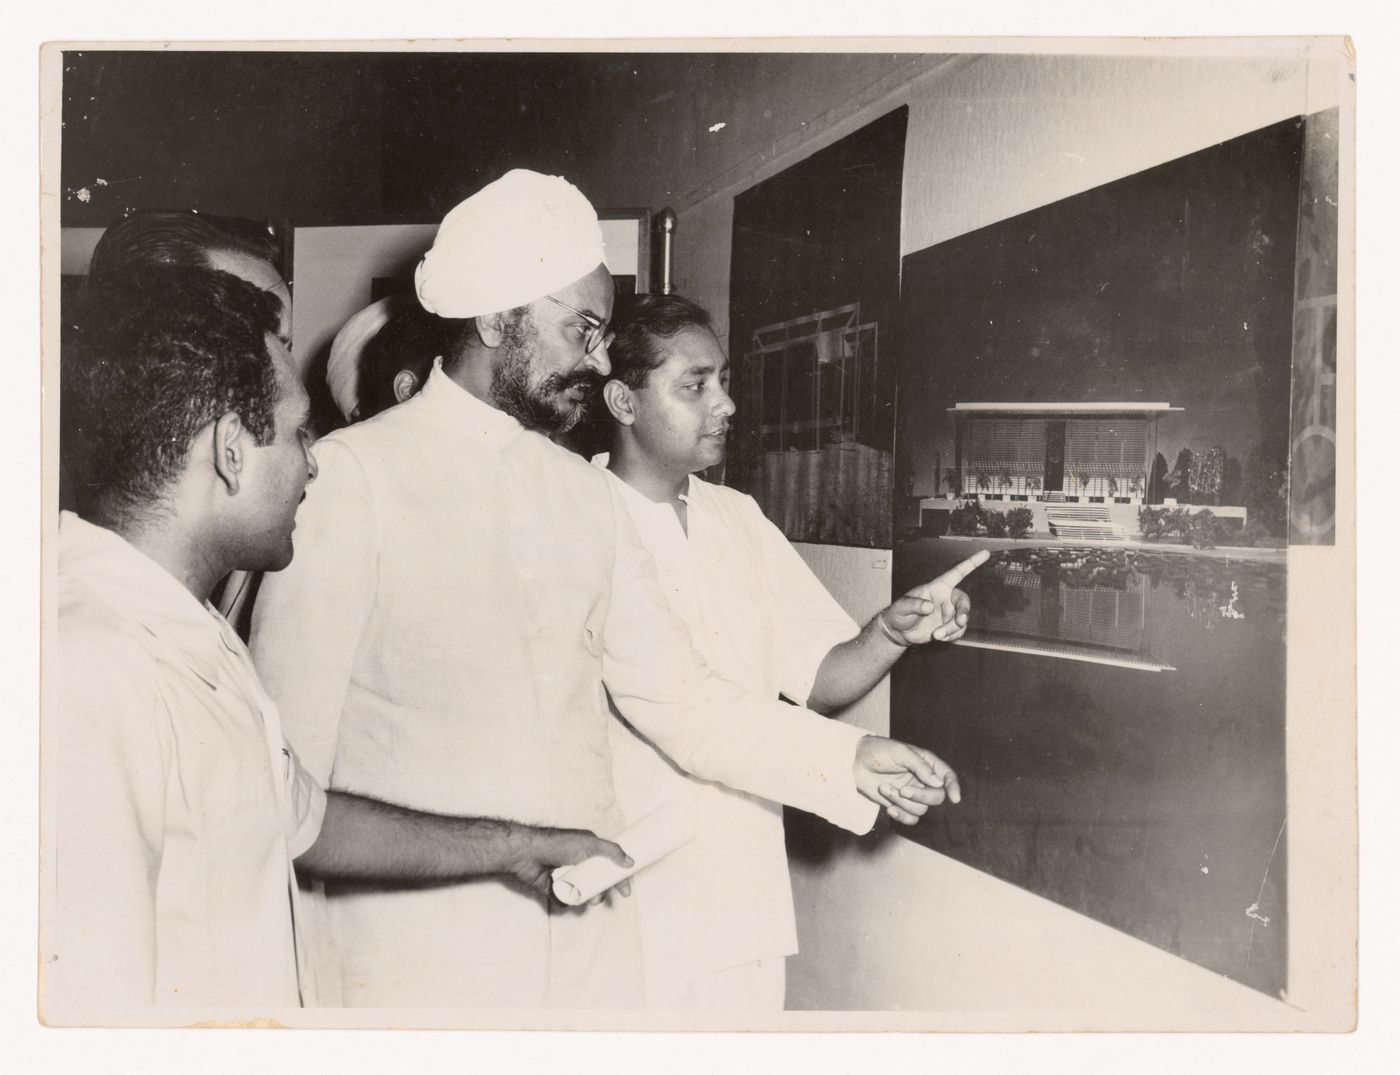 Photograph of Aditya Prakash showing material at an unidentified exhibition